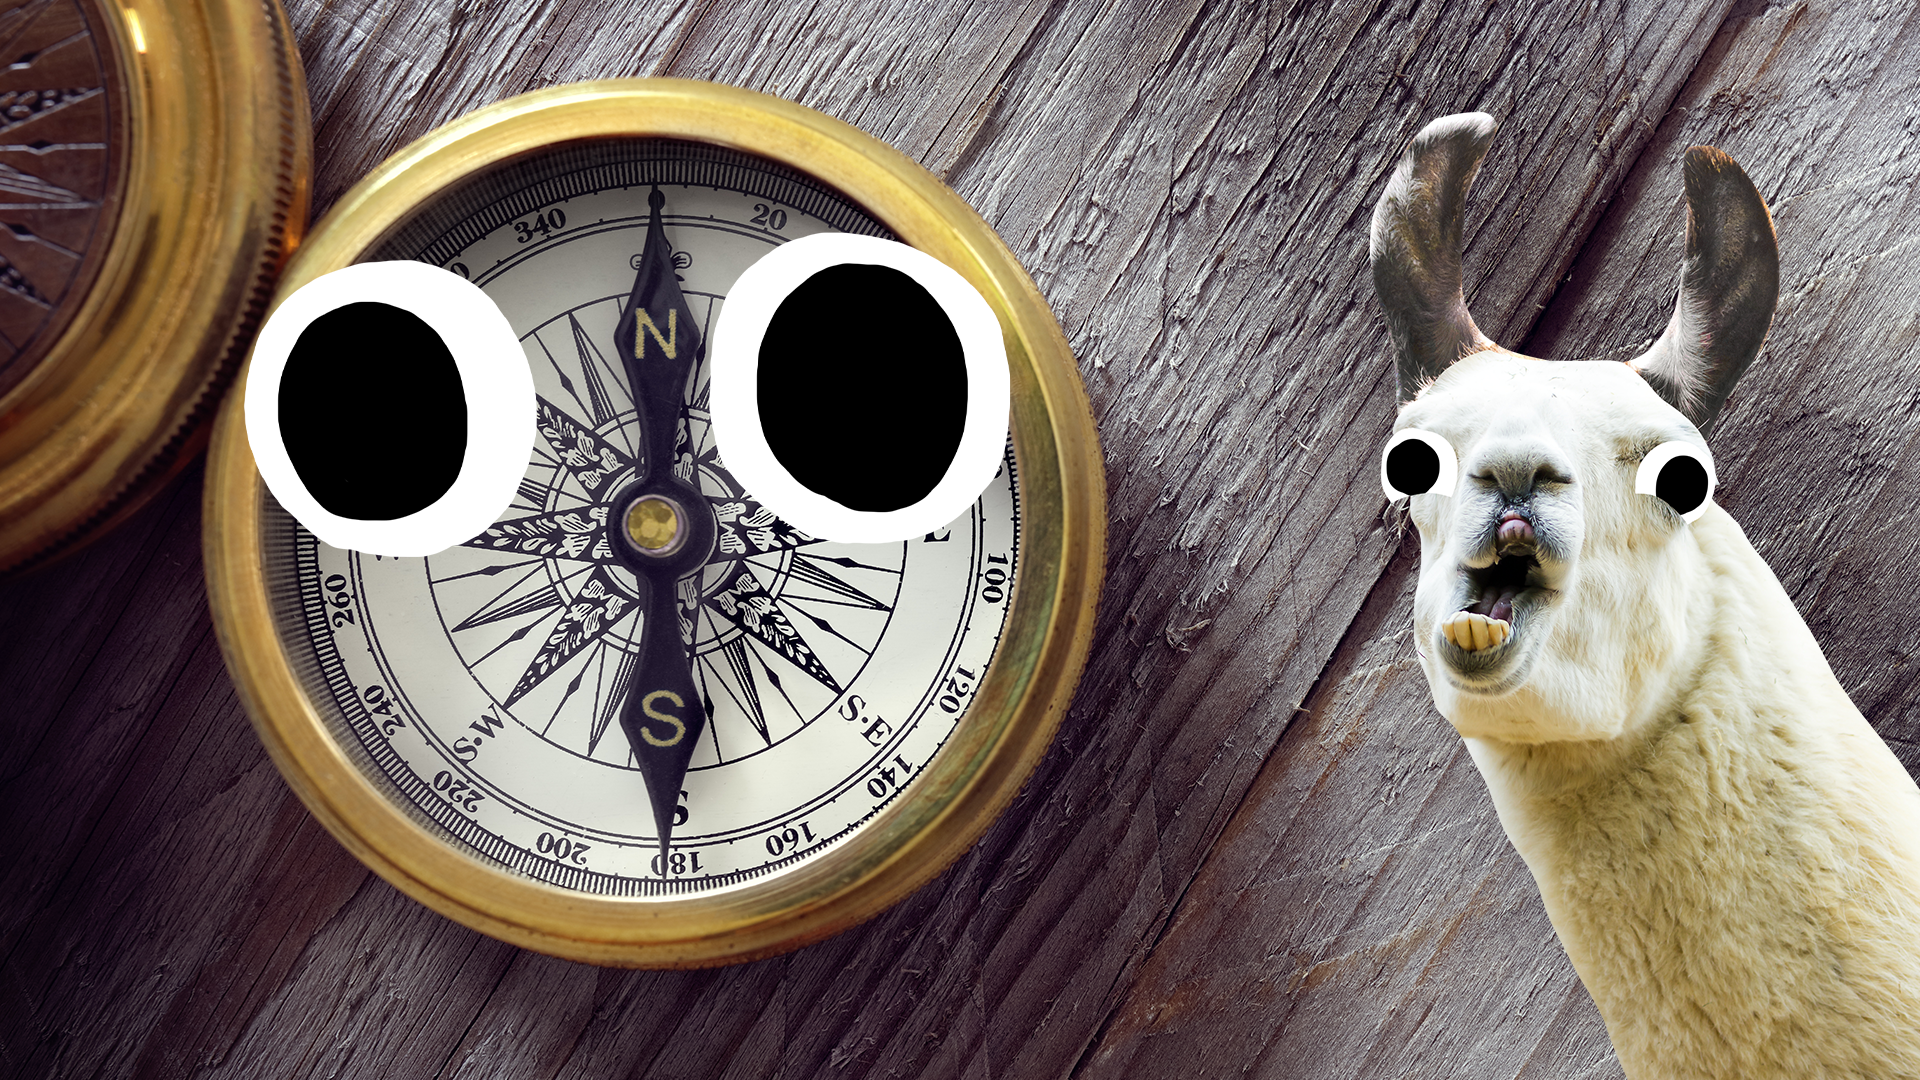 A golden compass with eyes and a derpy llama